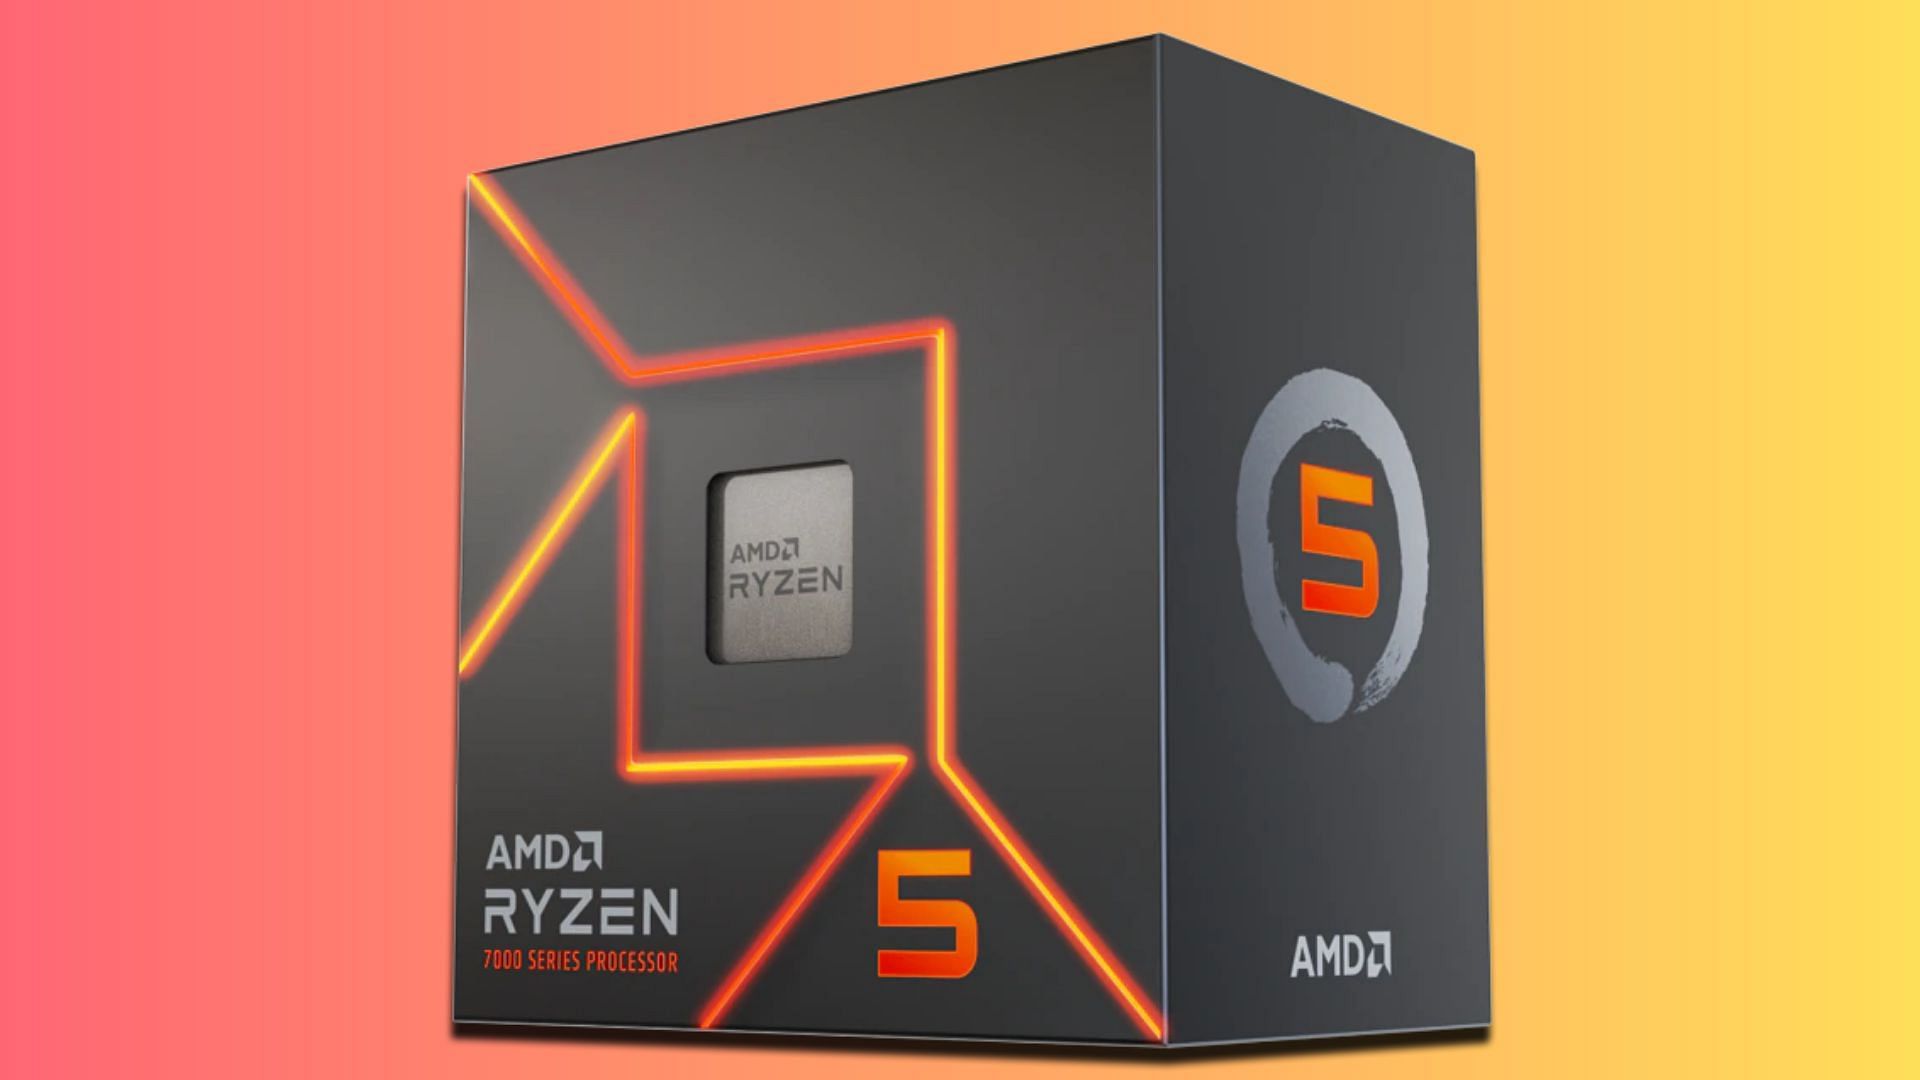 The AMD Ryzen 5 7600 is one of the best CPUs for gaming (Image via AMD)